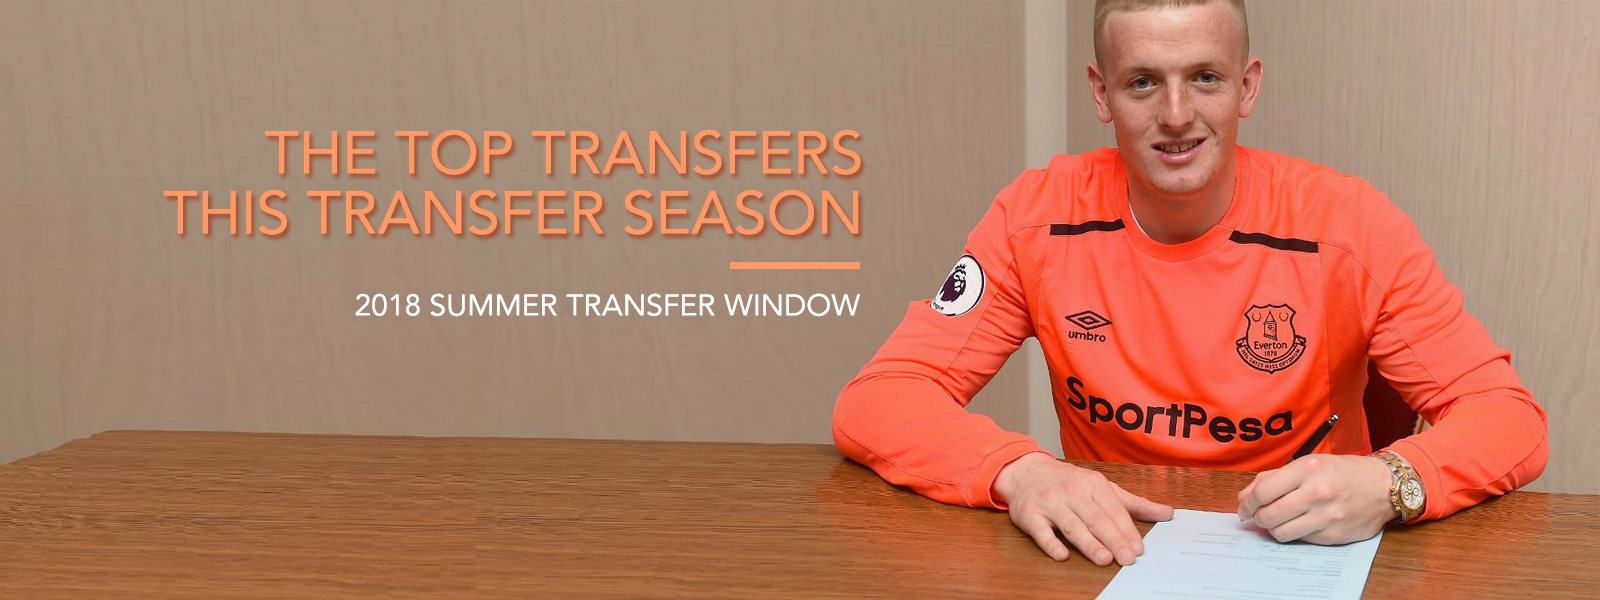 Top 3 Player Transfer Reviews In 2018 Summer Transfer Window